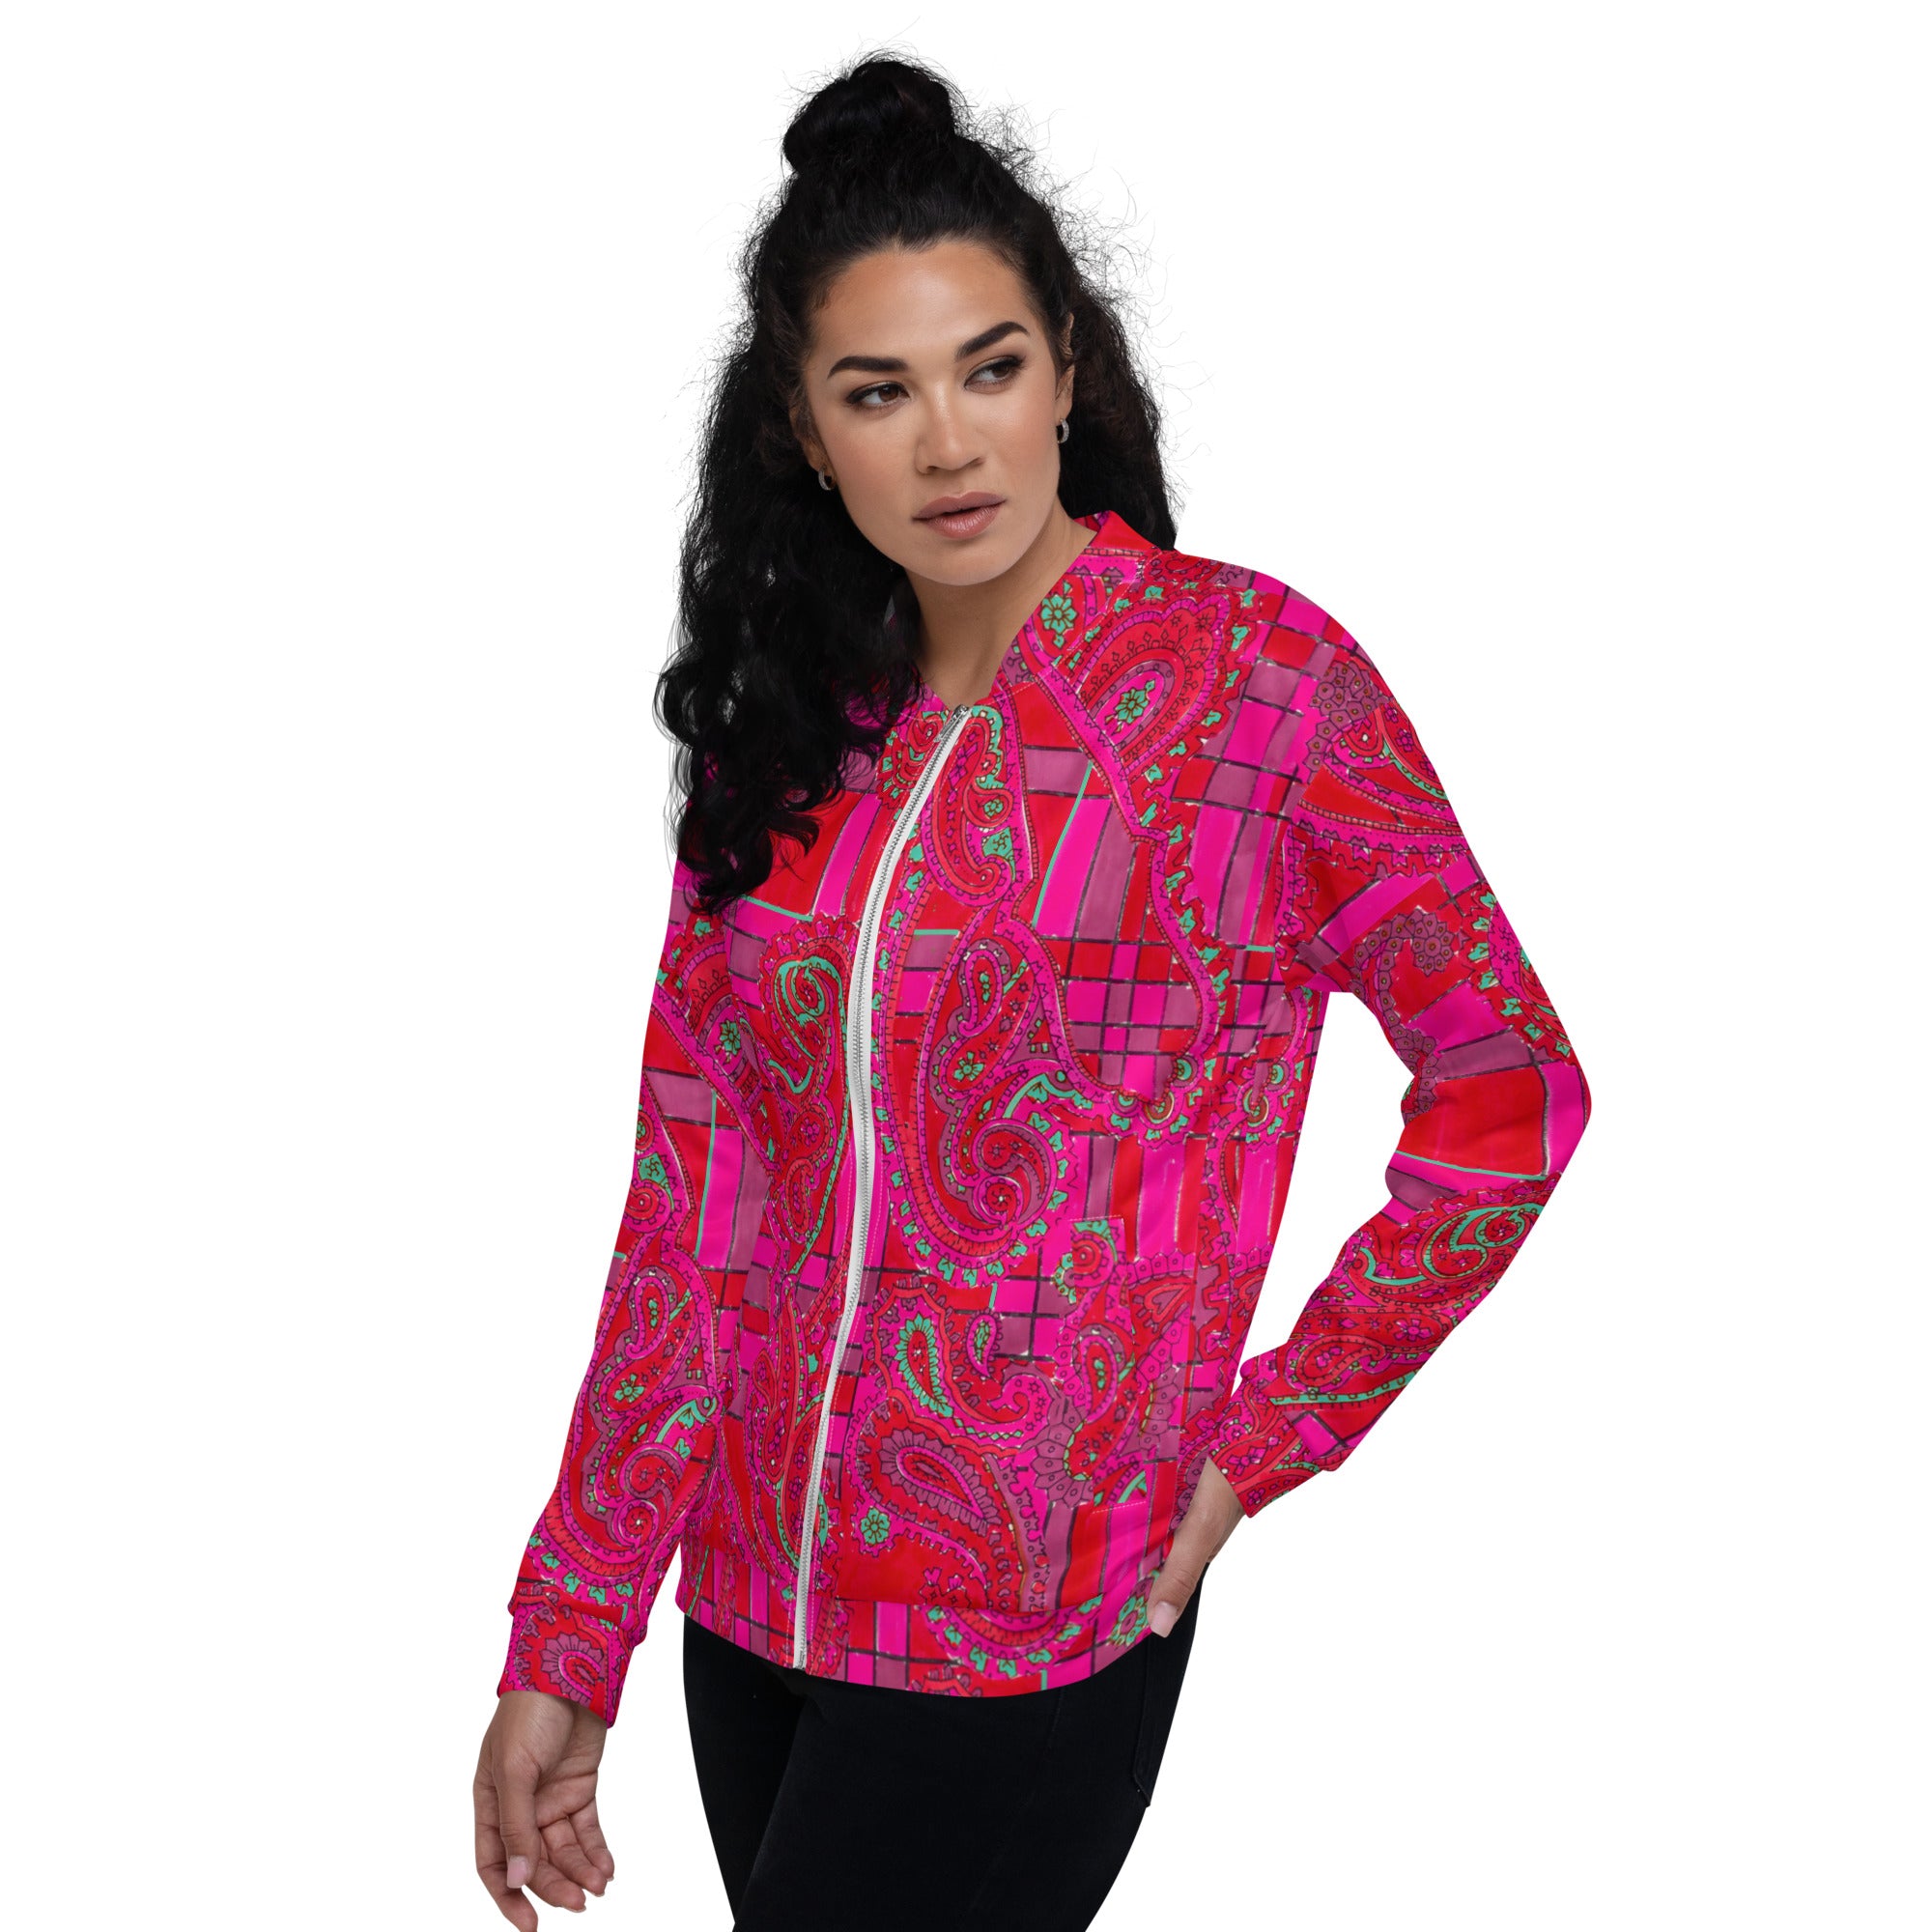 Recycled Unisex Bomber Jacket - Bright Fuscia and Red Poppy